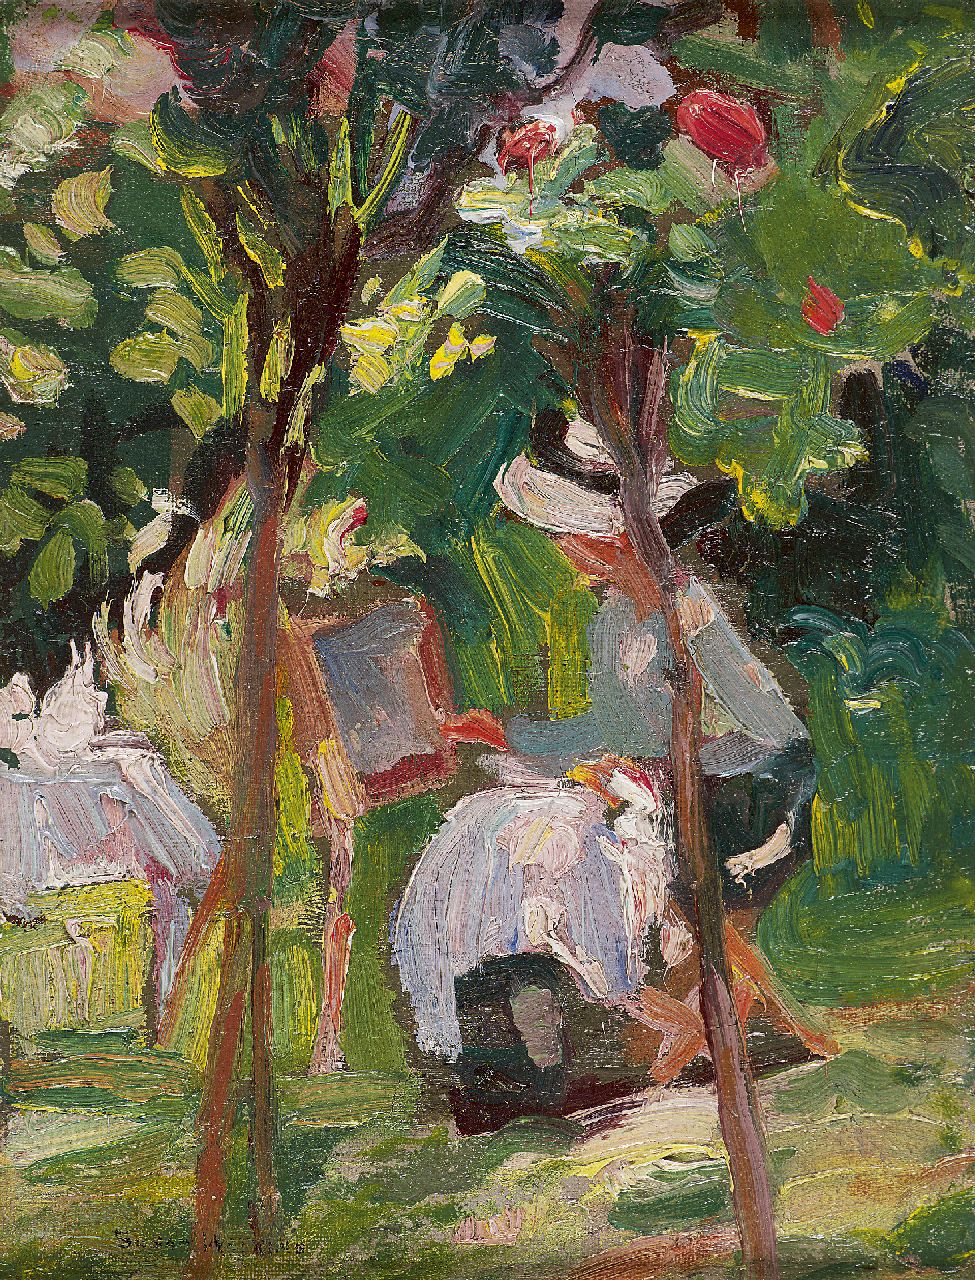 Susan Watkins | Painting in the garden, oil on canvas laid down on board, 23.1 x 17.9 cm, signed l.l.